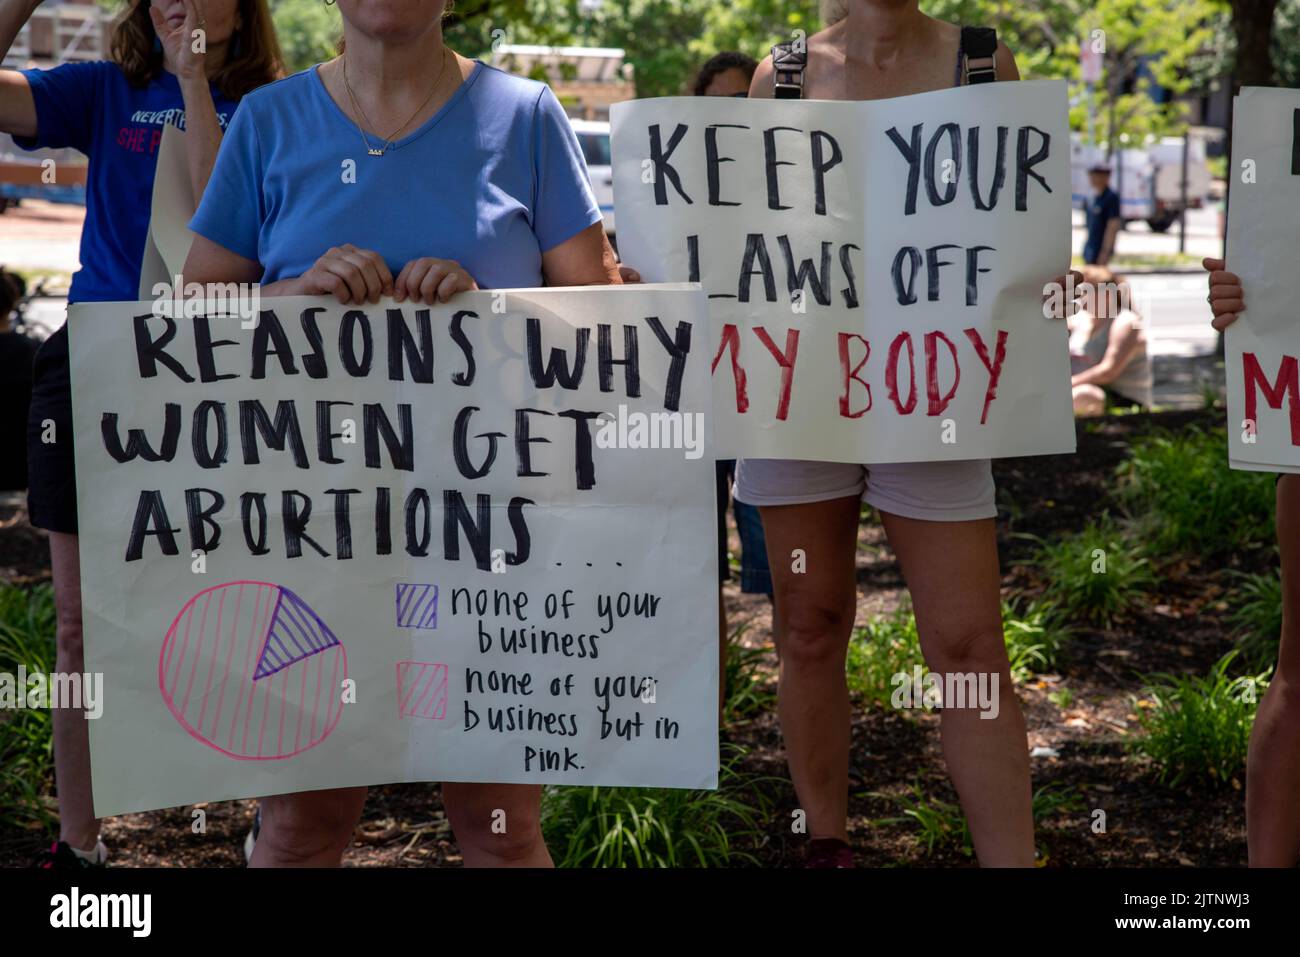 Women hold pro-choice protest signs at a political rally Stock Photo